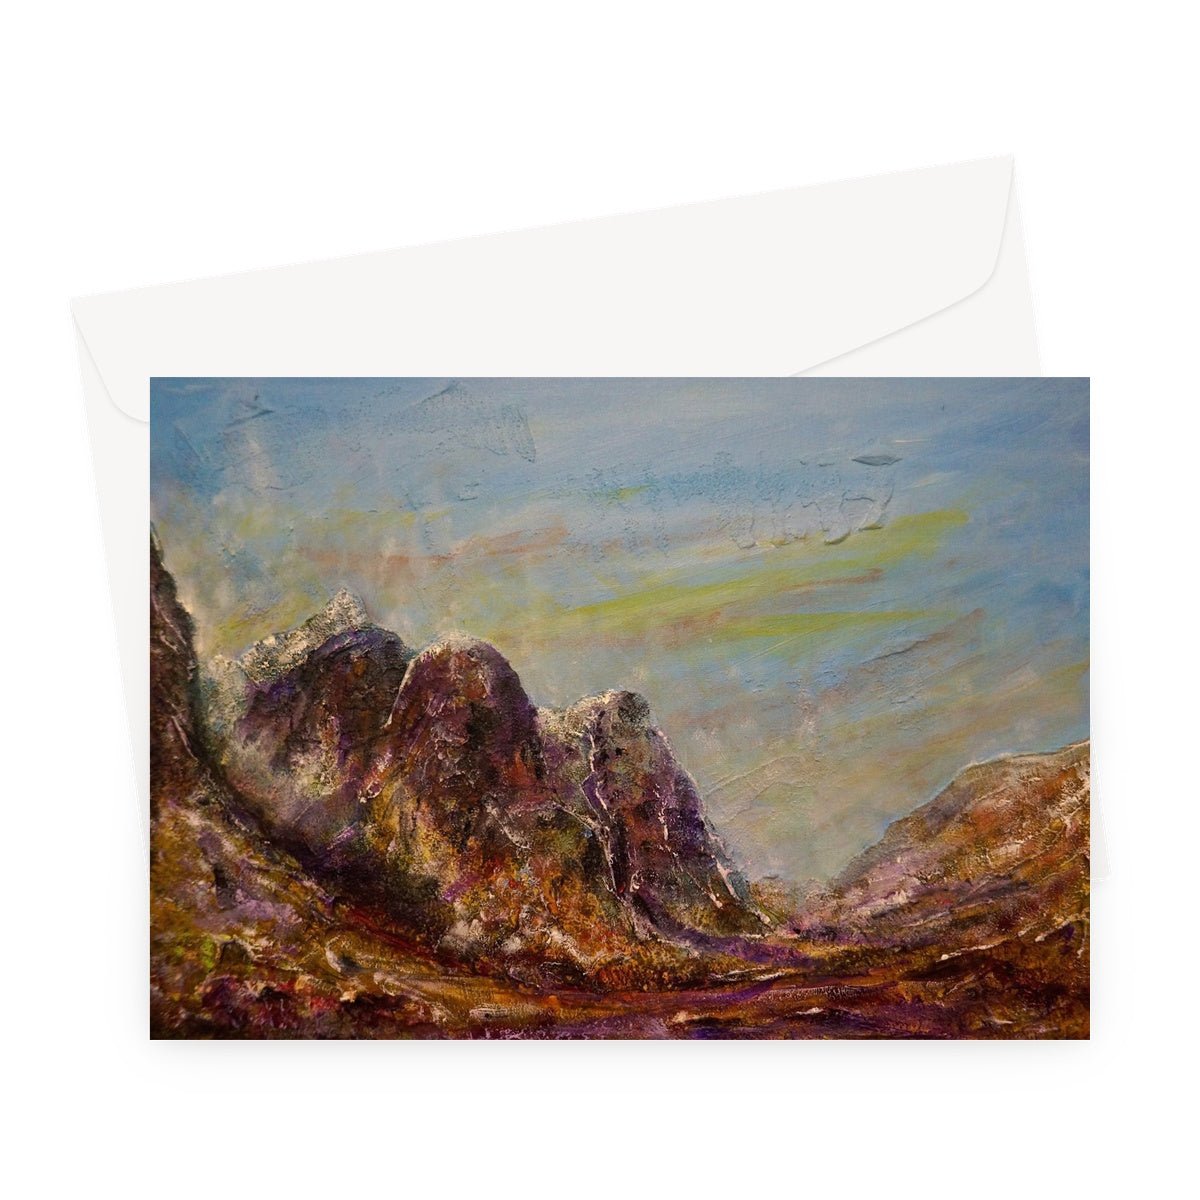 Three Sisters Glencoe Art Gifts Greeting Card-Greetings Cards-Glencoe Art Gallery-A5 Landscape-1 Card-Paintings, Prints, Homeware, Art Gifts From Scotland By Scottish Artist Kevin Hunter